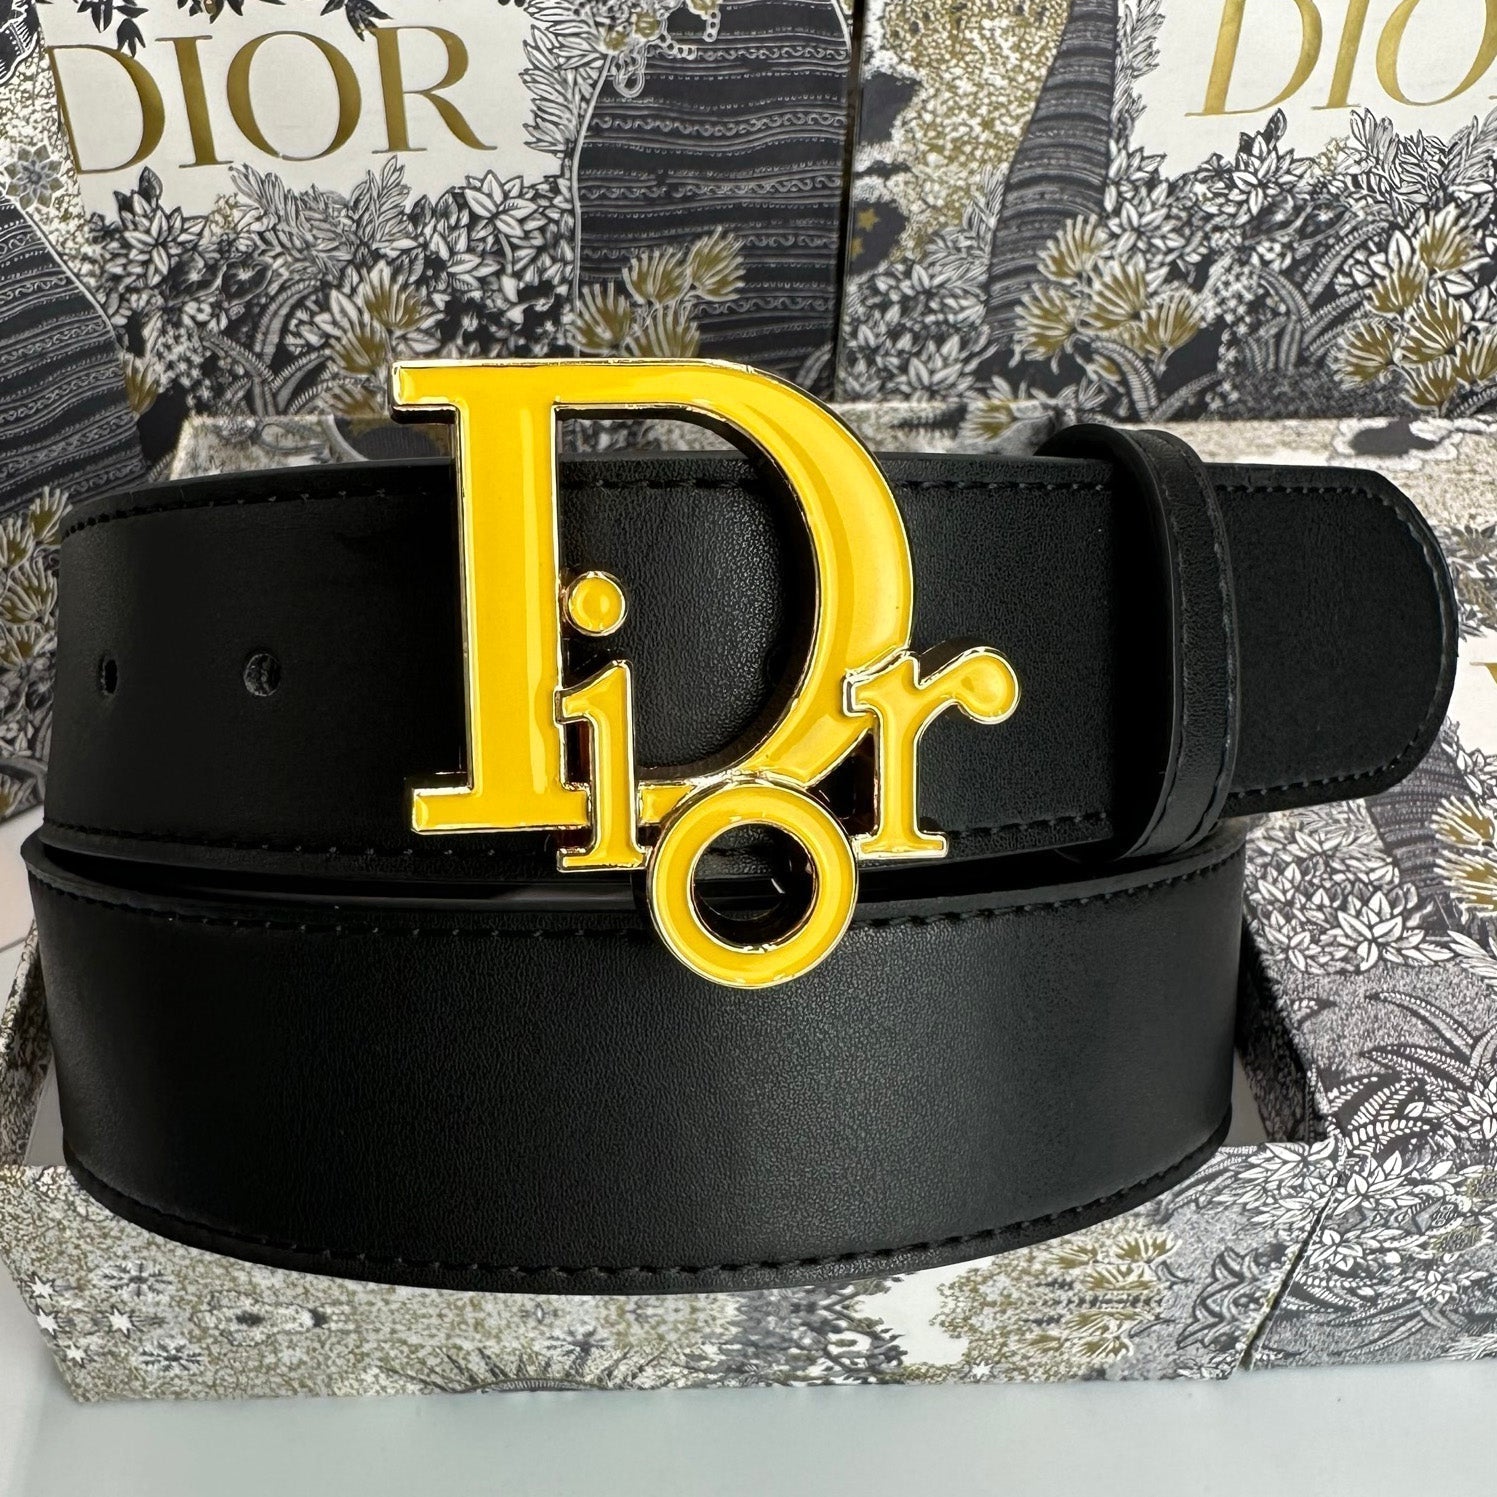 Dior New Women's and Men's Fashionable And Exquisite Buc